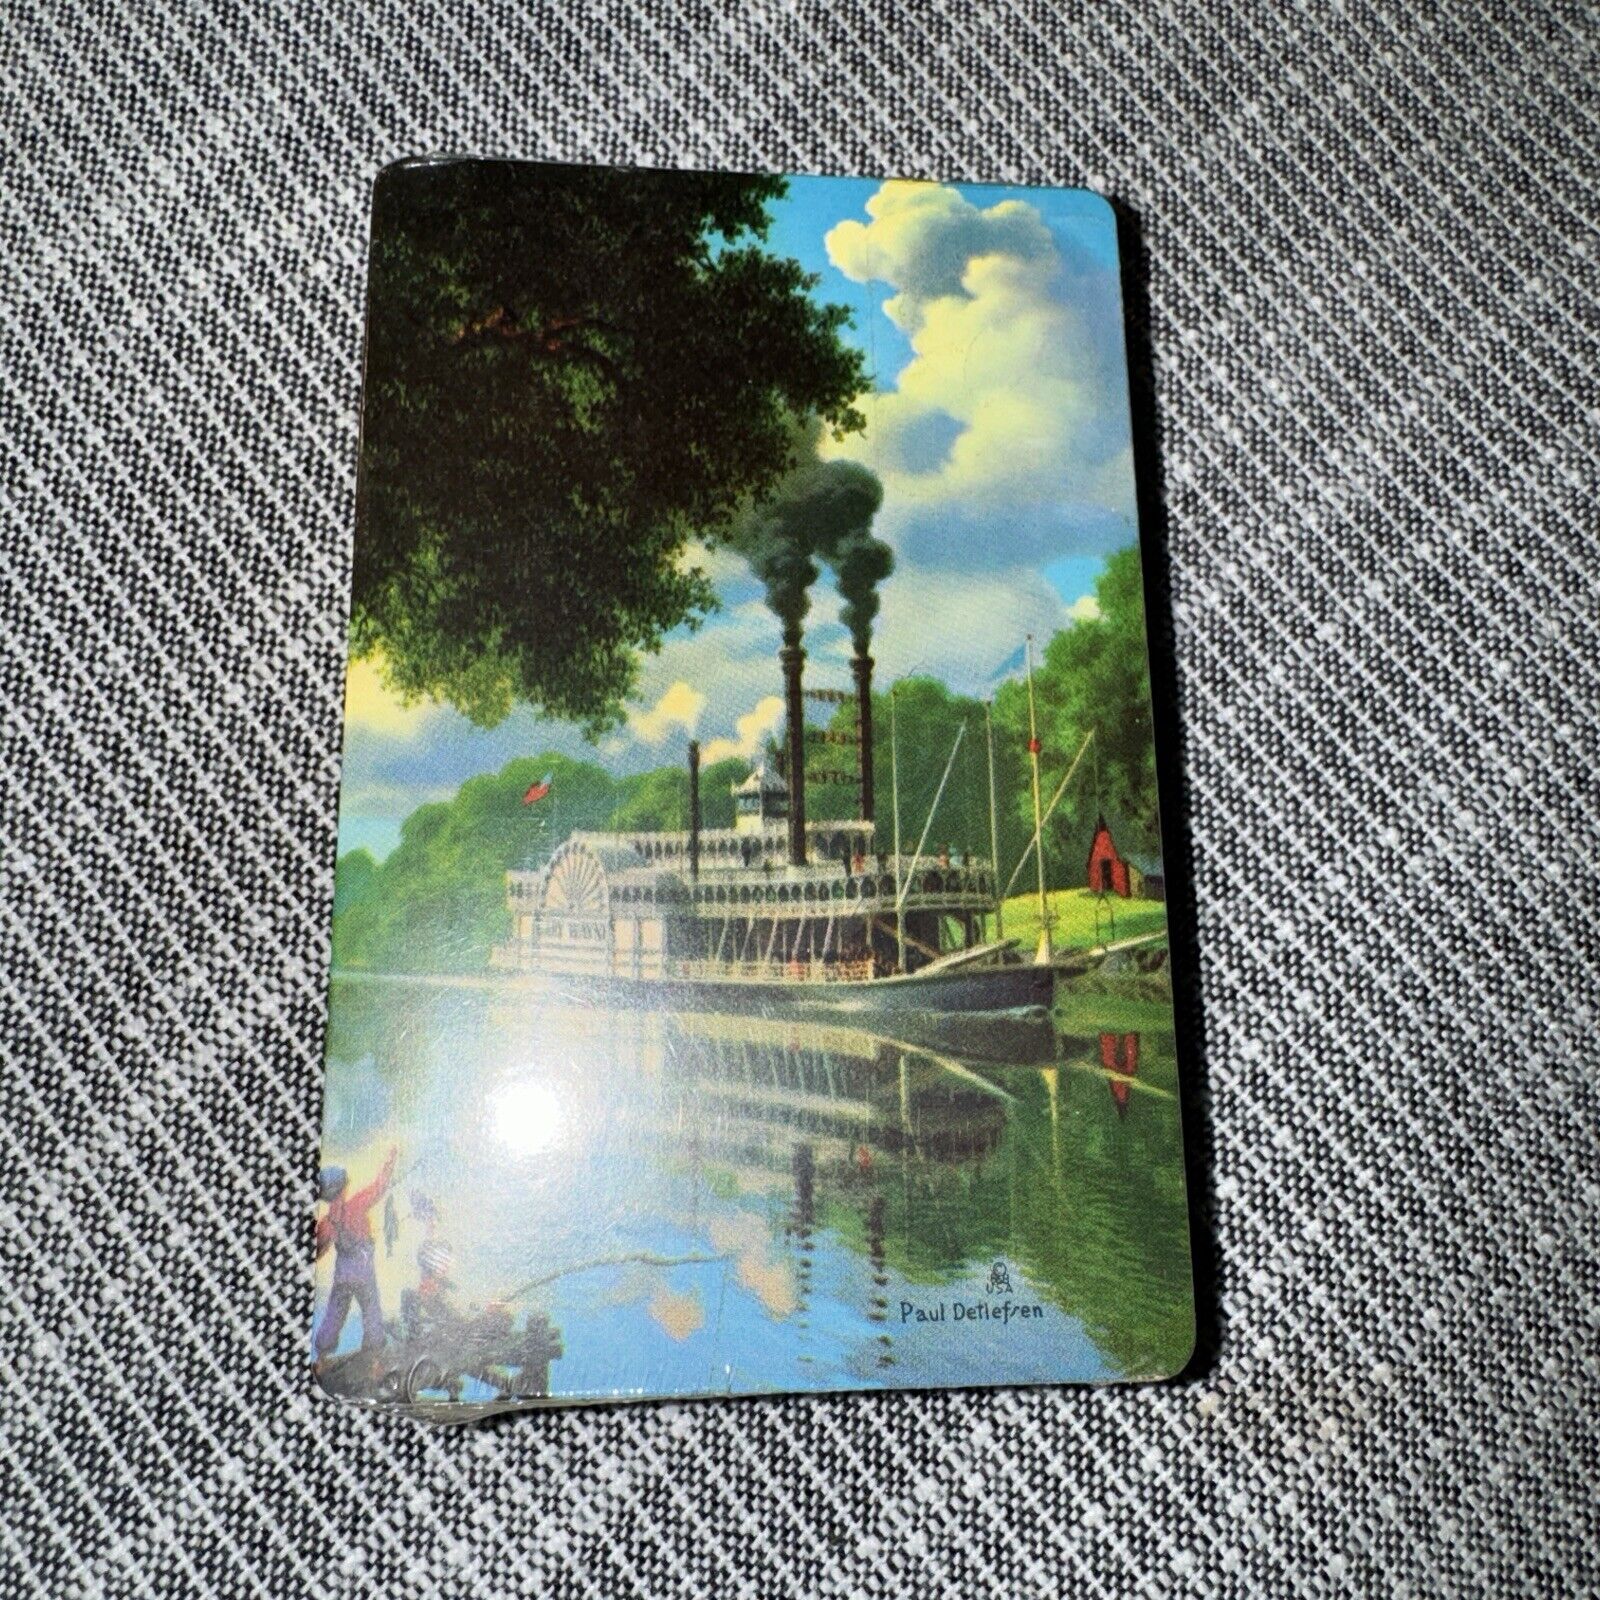 Vintage Steamboat Playing Cards - Paul Detlefsen - New Sealed Unopened